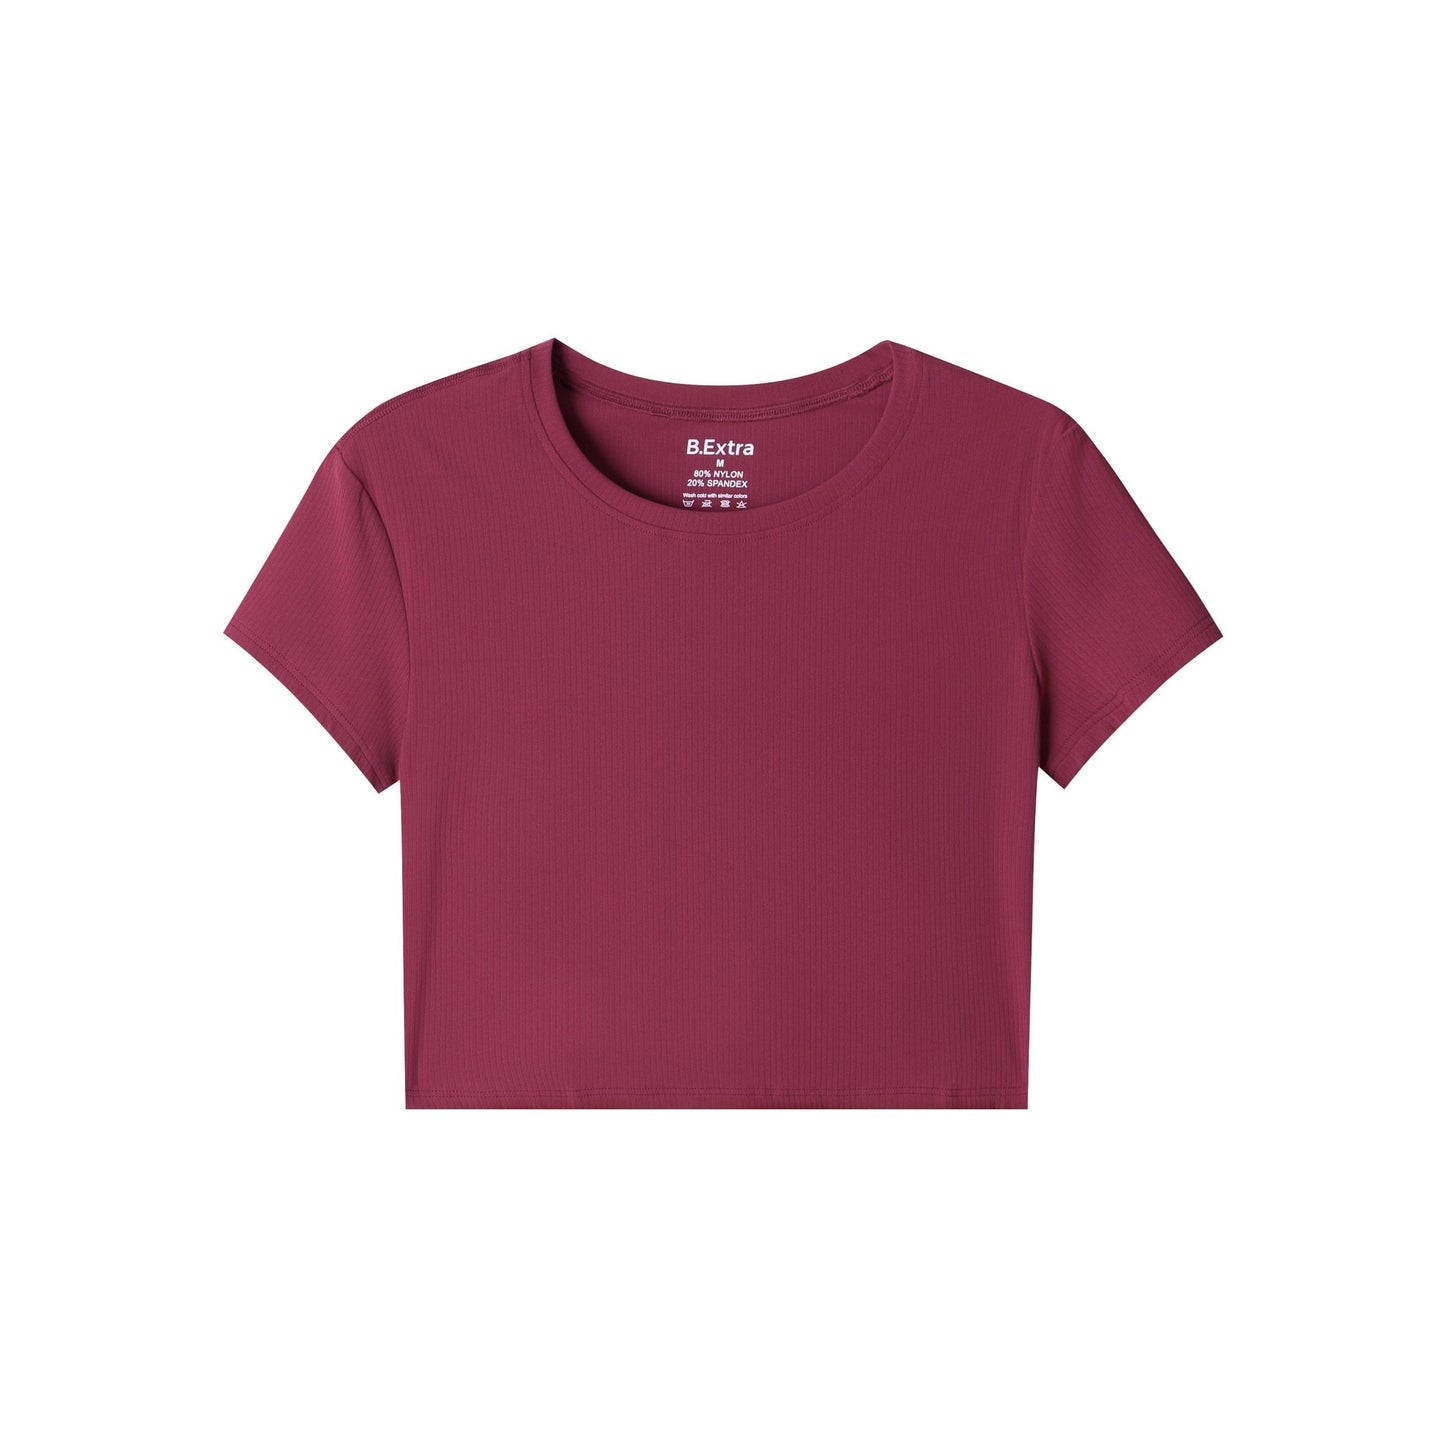 Cropped Fit Tee - Cherry Red